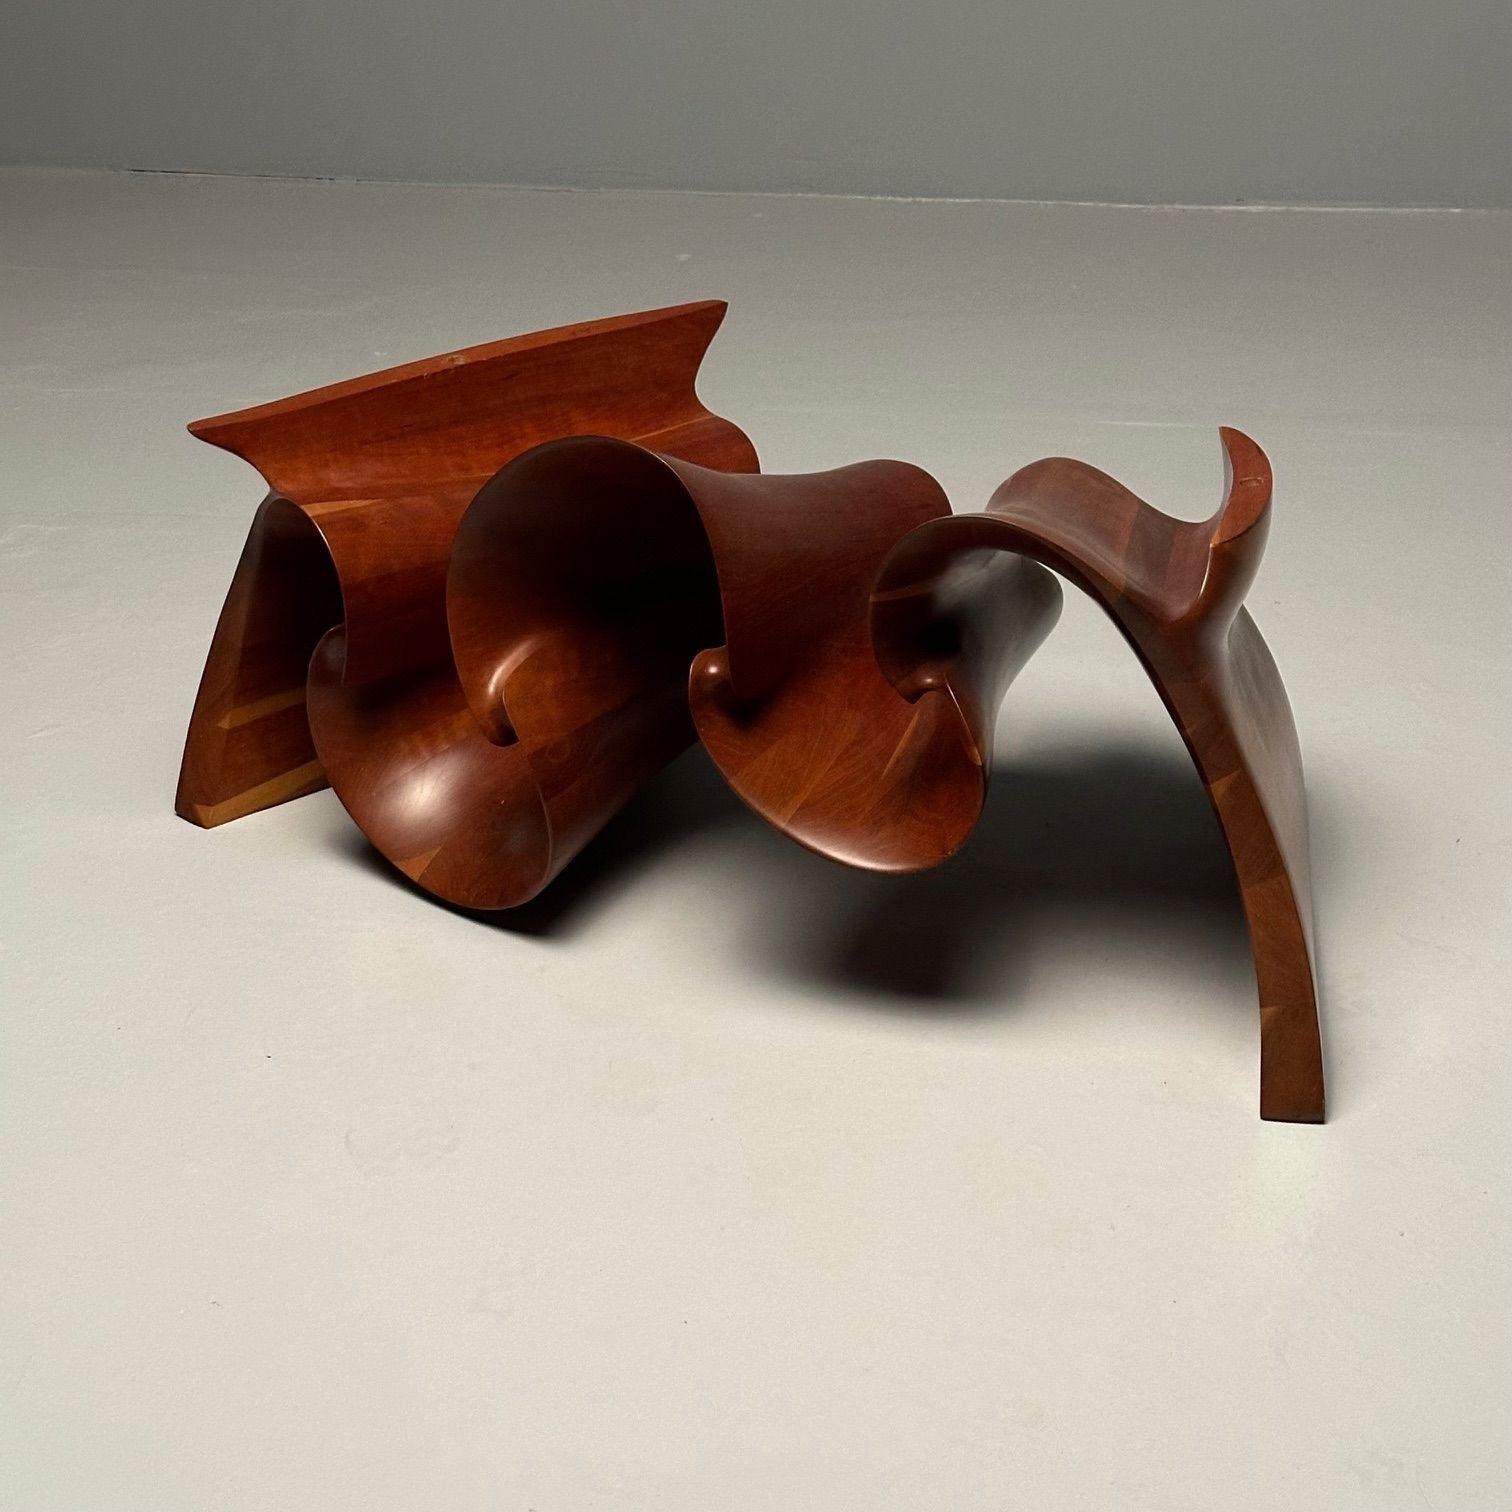 Peter Michael Adams, Mid-Century, Sculptural Coffee Table, Walnut, USA, 1970s For Sale 9